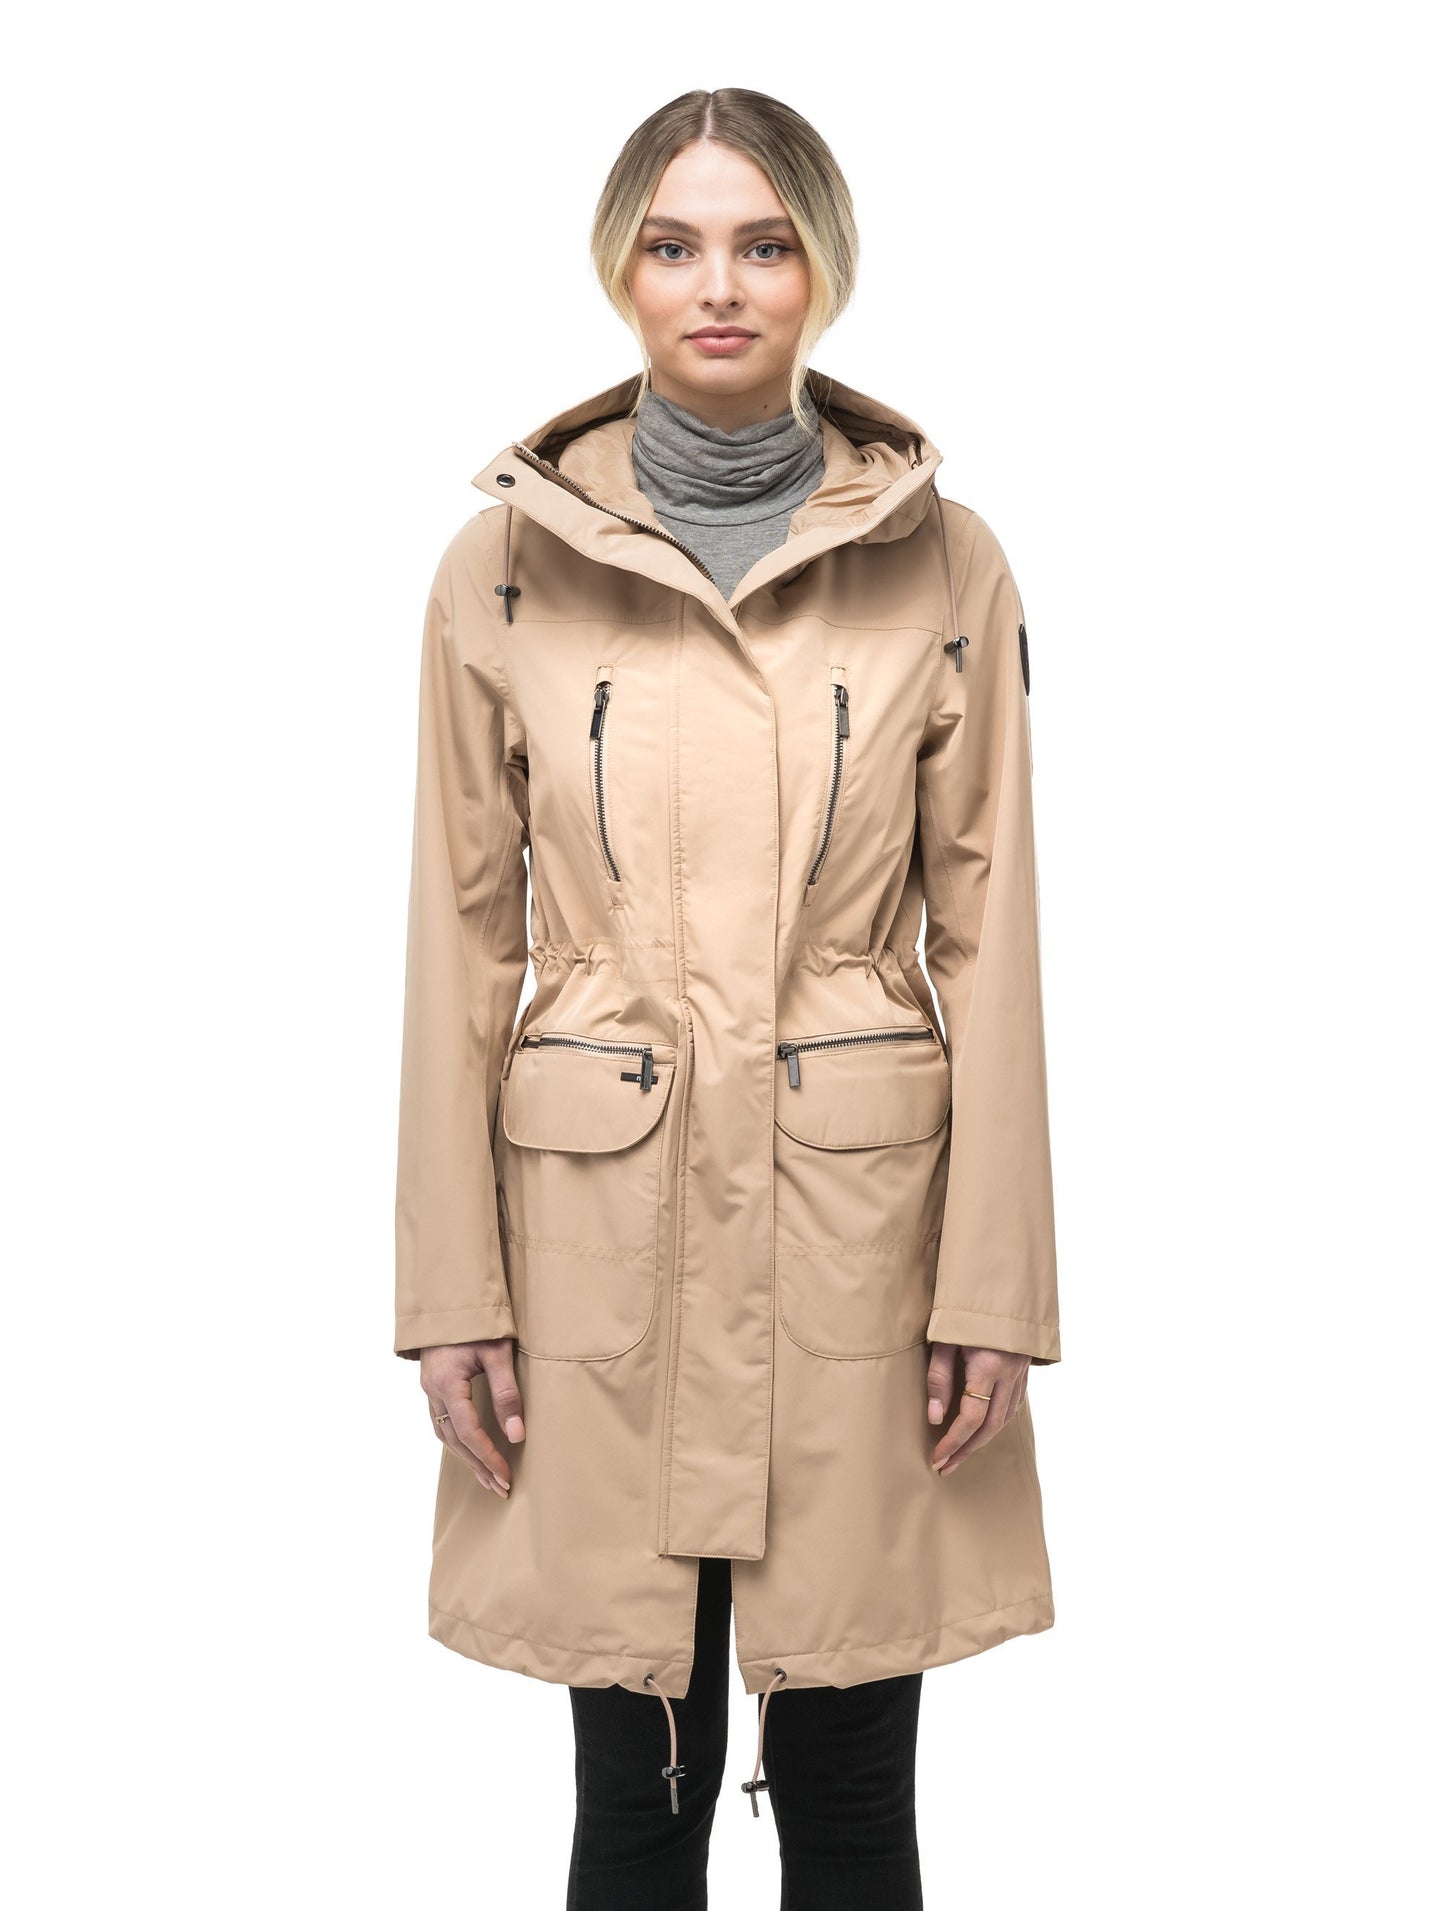 Women's knee length anorak with four front pockets and adjustable cord waist in Fawn